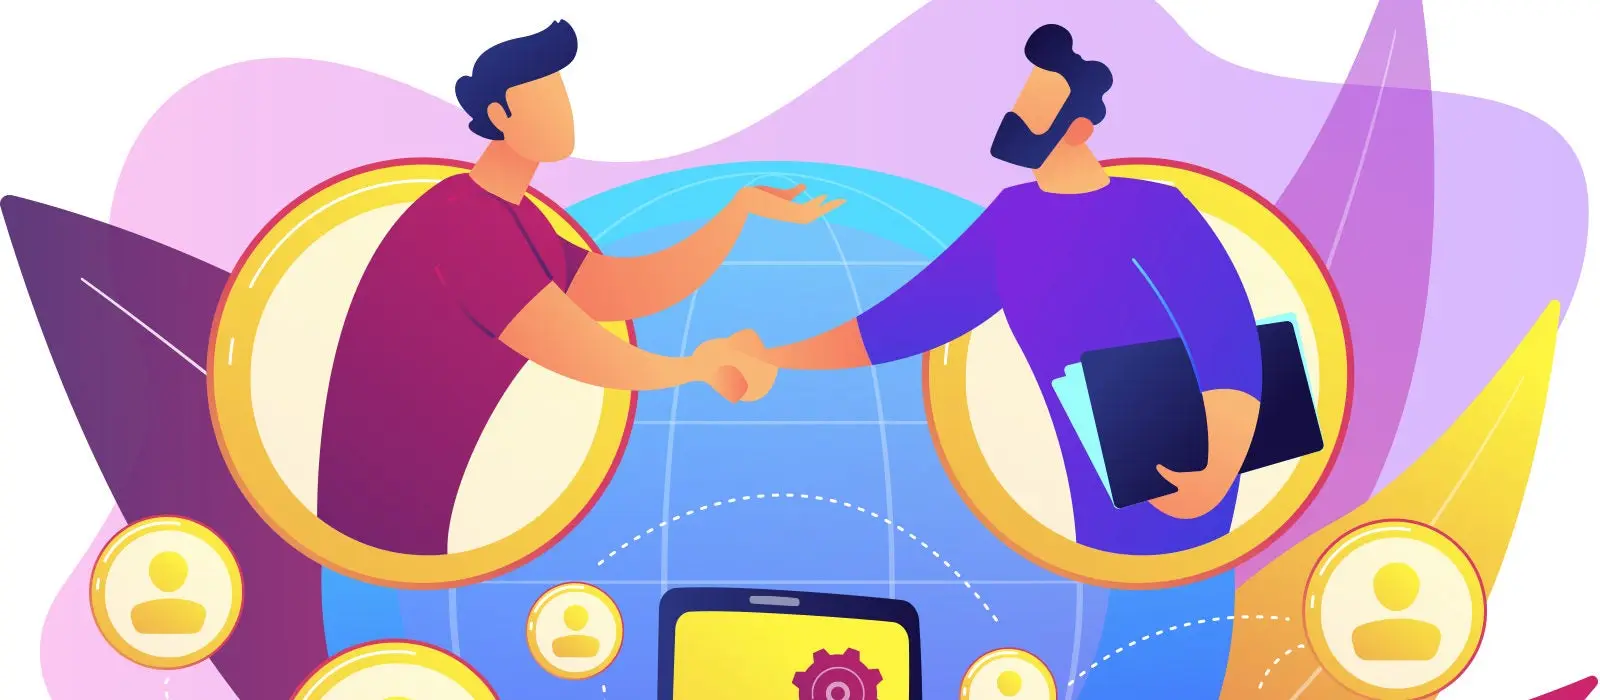 Vector image with 2 men shaking hands via technology.